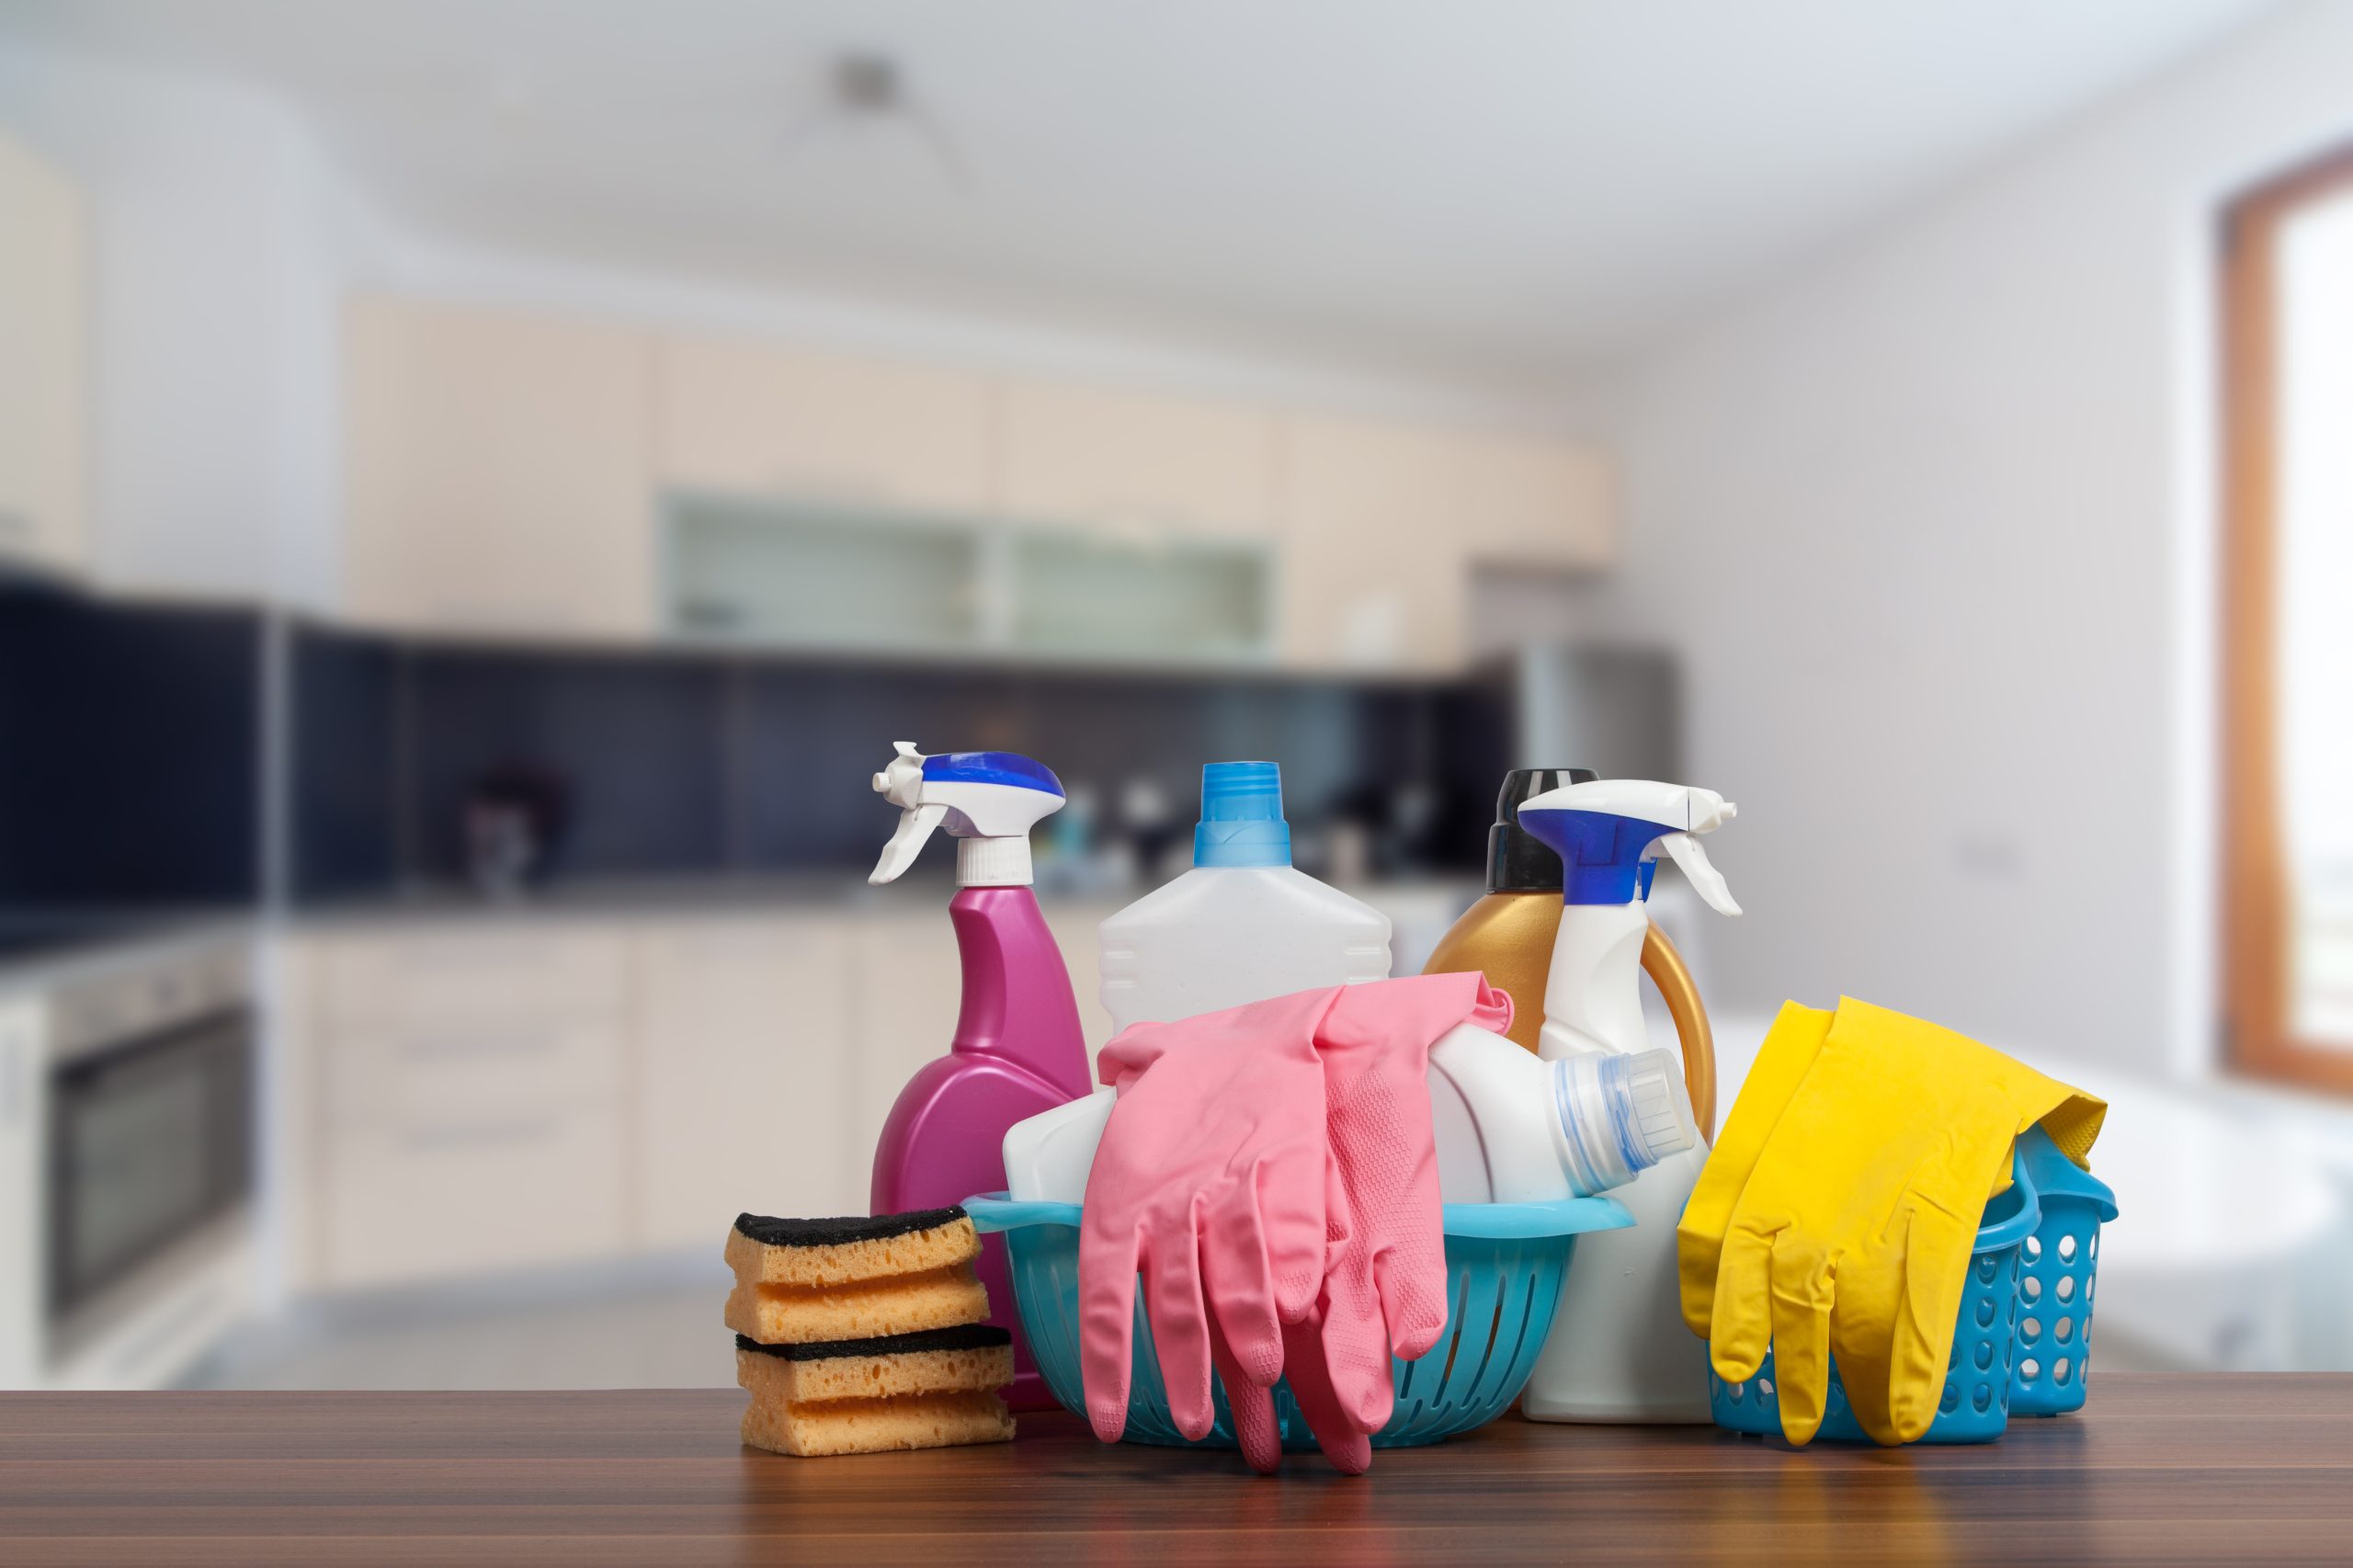 Do you provide cleaning services for vacation rentals?